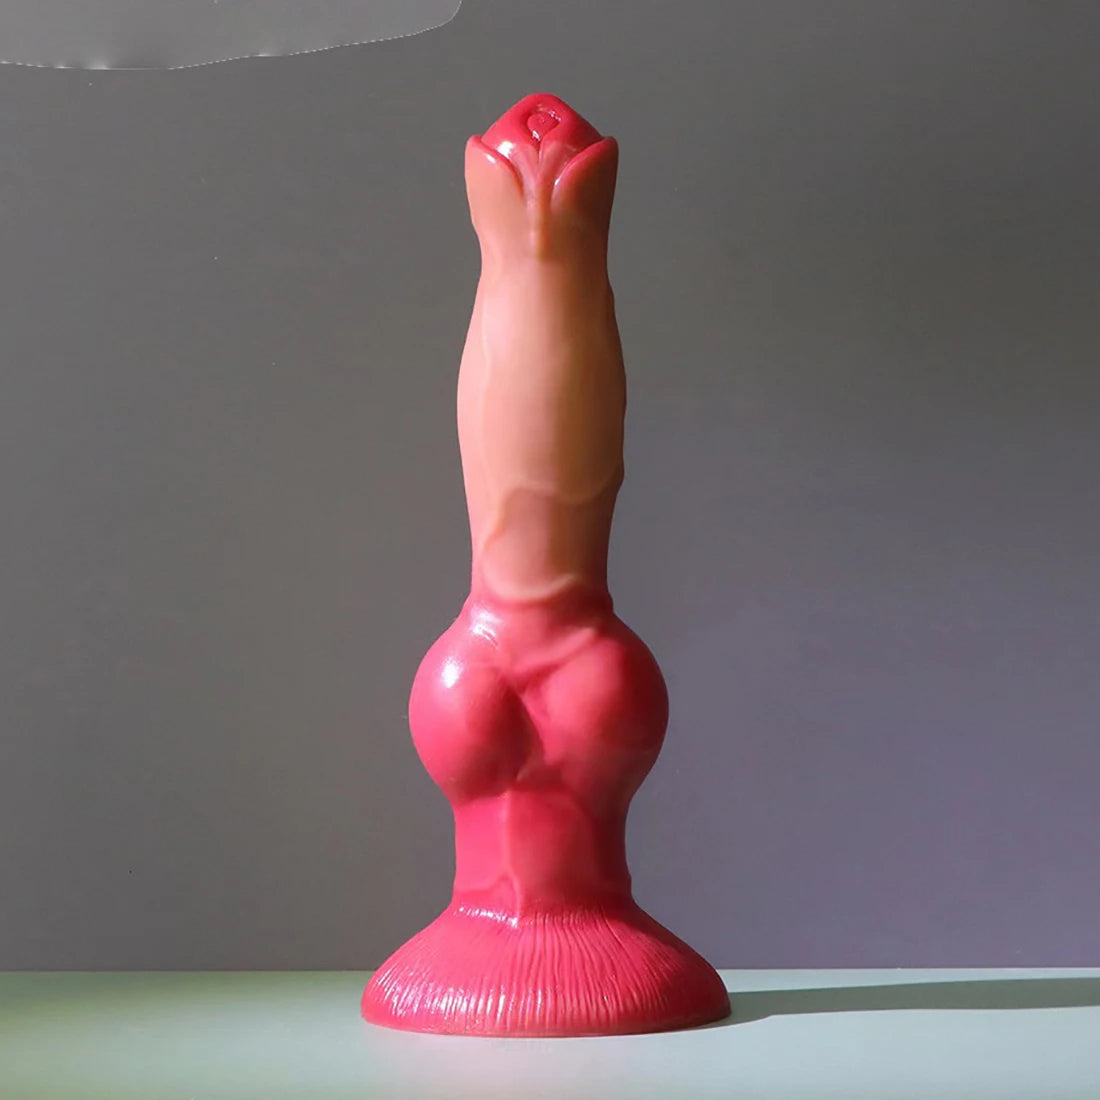 Realistic Dog Dildo Butt Plug - Huge Flesh Silicone Dildo with Big Suction Cup.